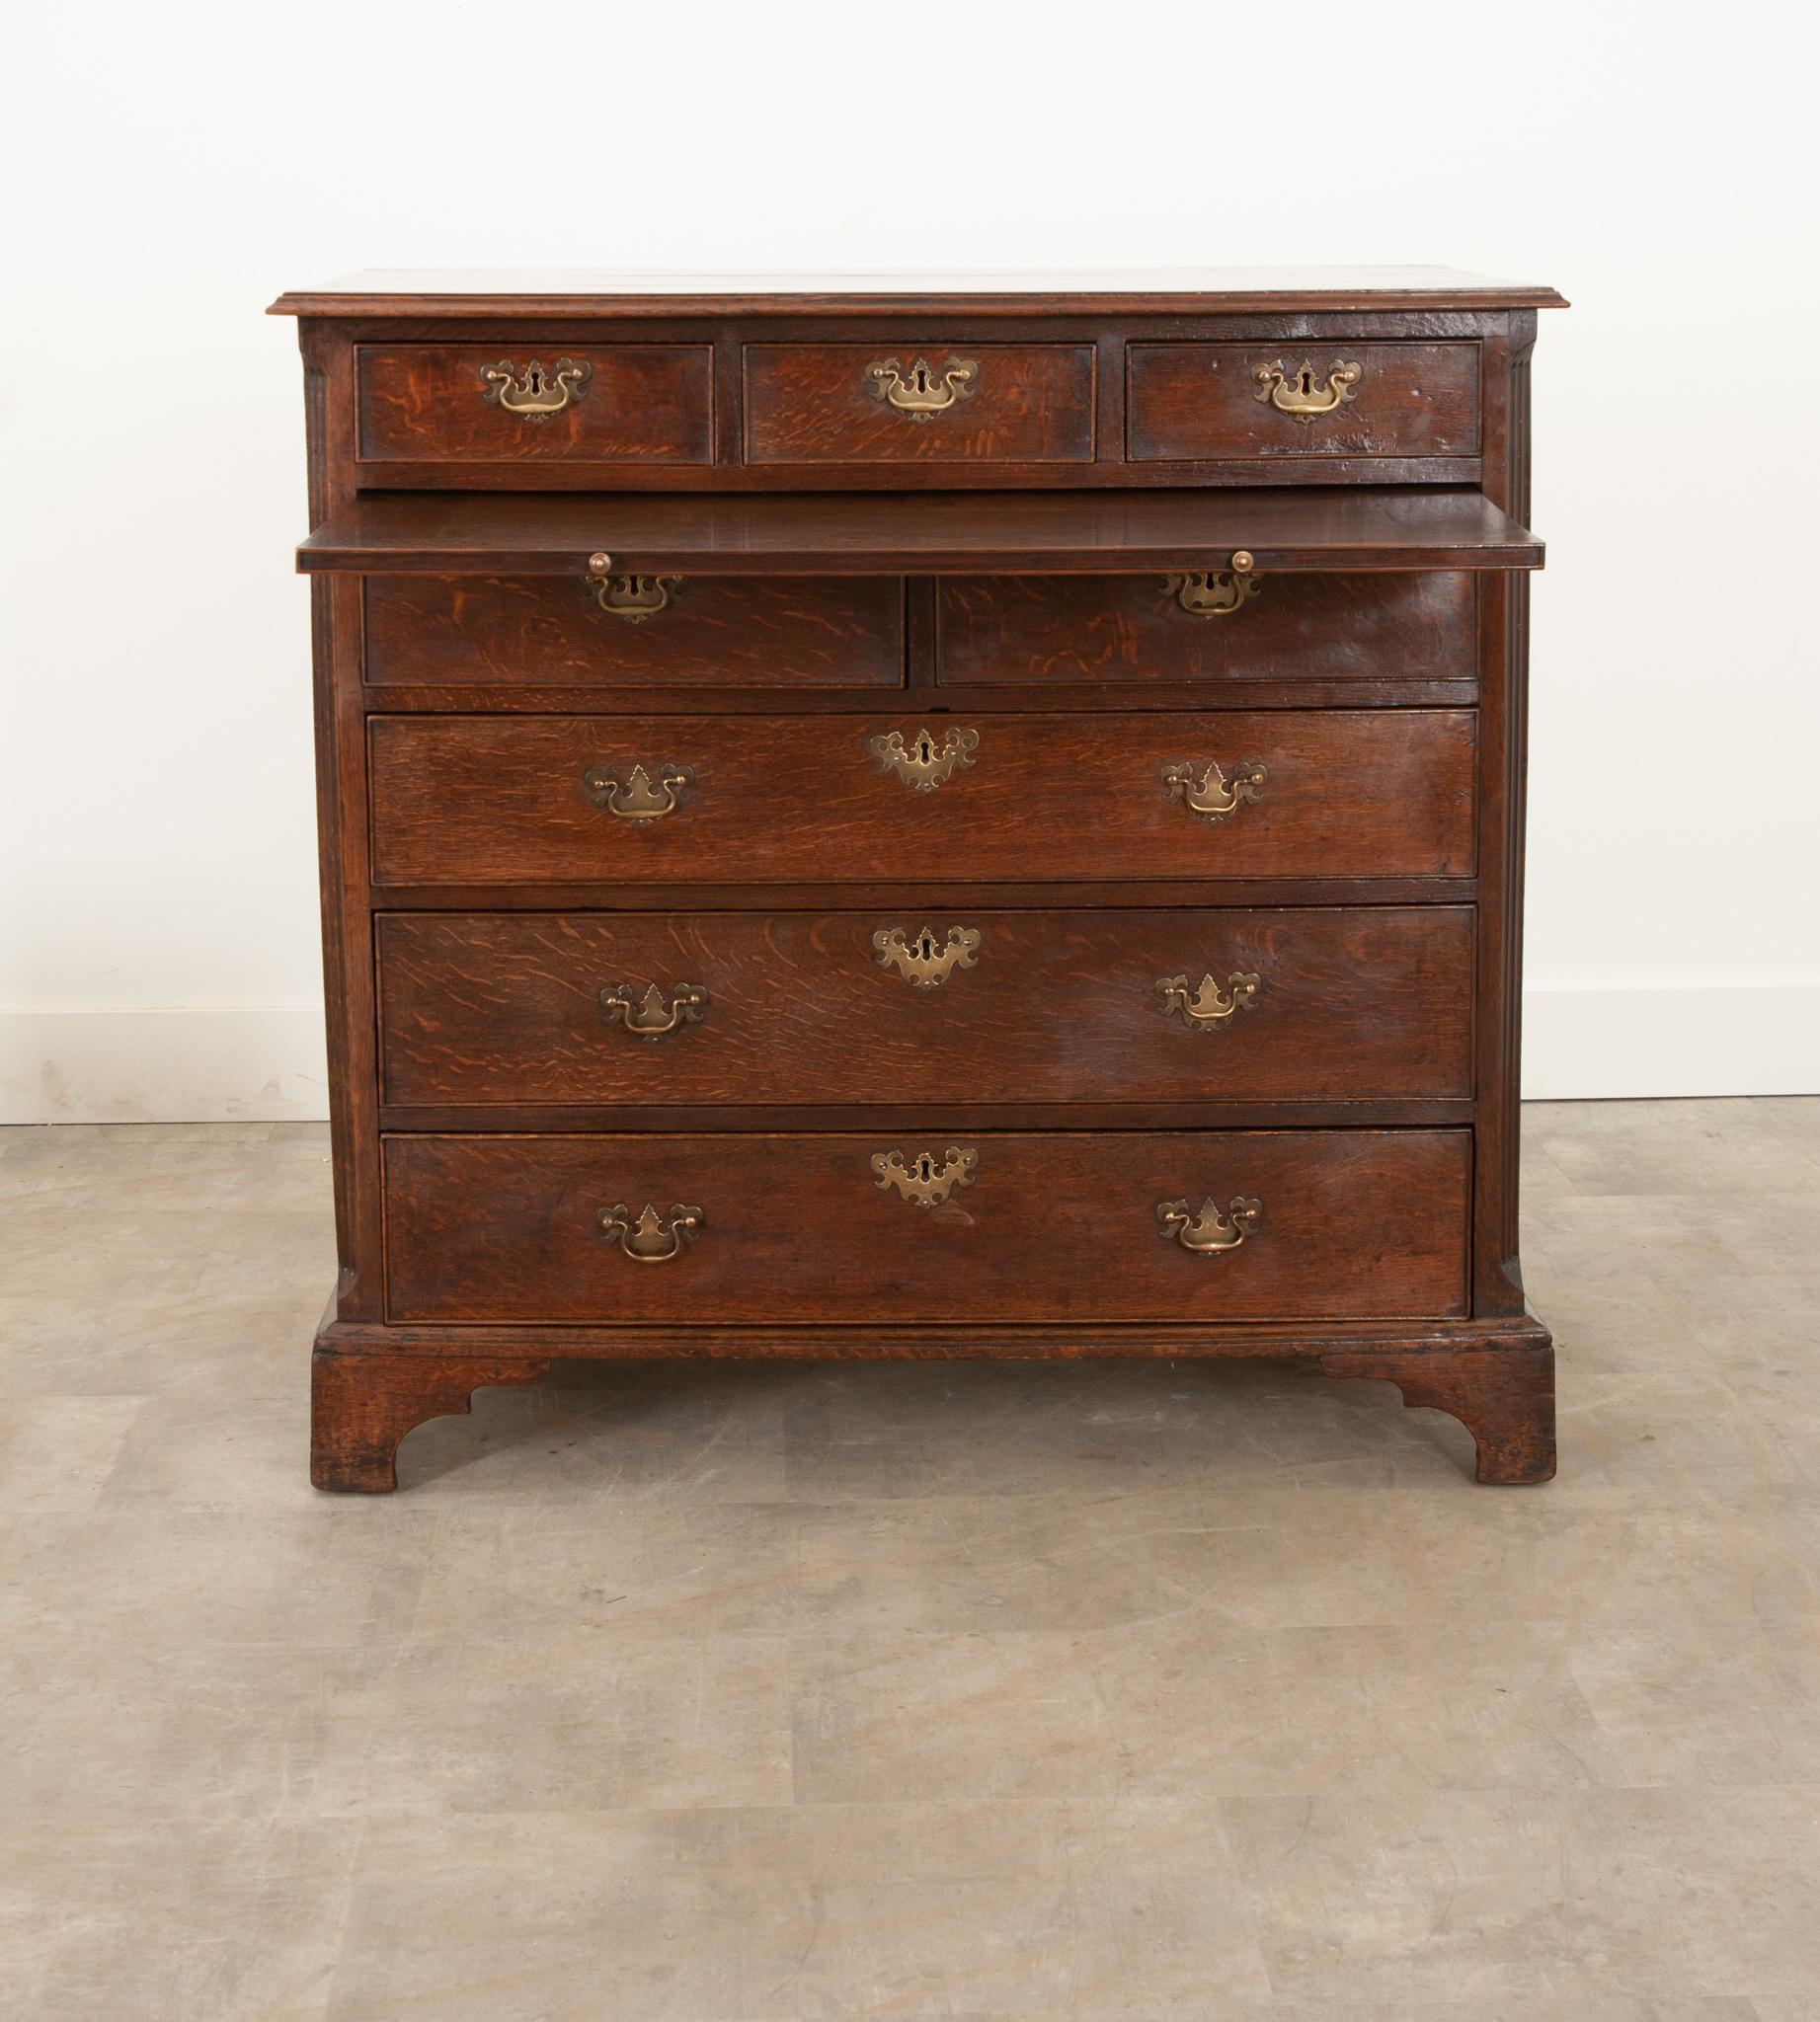 A classic, solid oak chest of drawers with a large pull-out linen folding slide over graduating drawers and bracket feet. Classic solid brass drawer pulls and escutcheon plates grace all the drawer fronts. No keys are present, however the pulls make